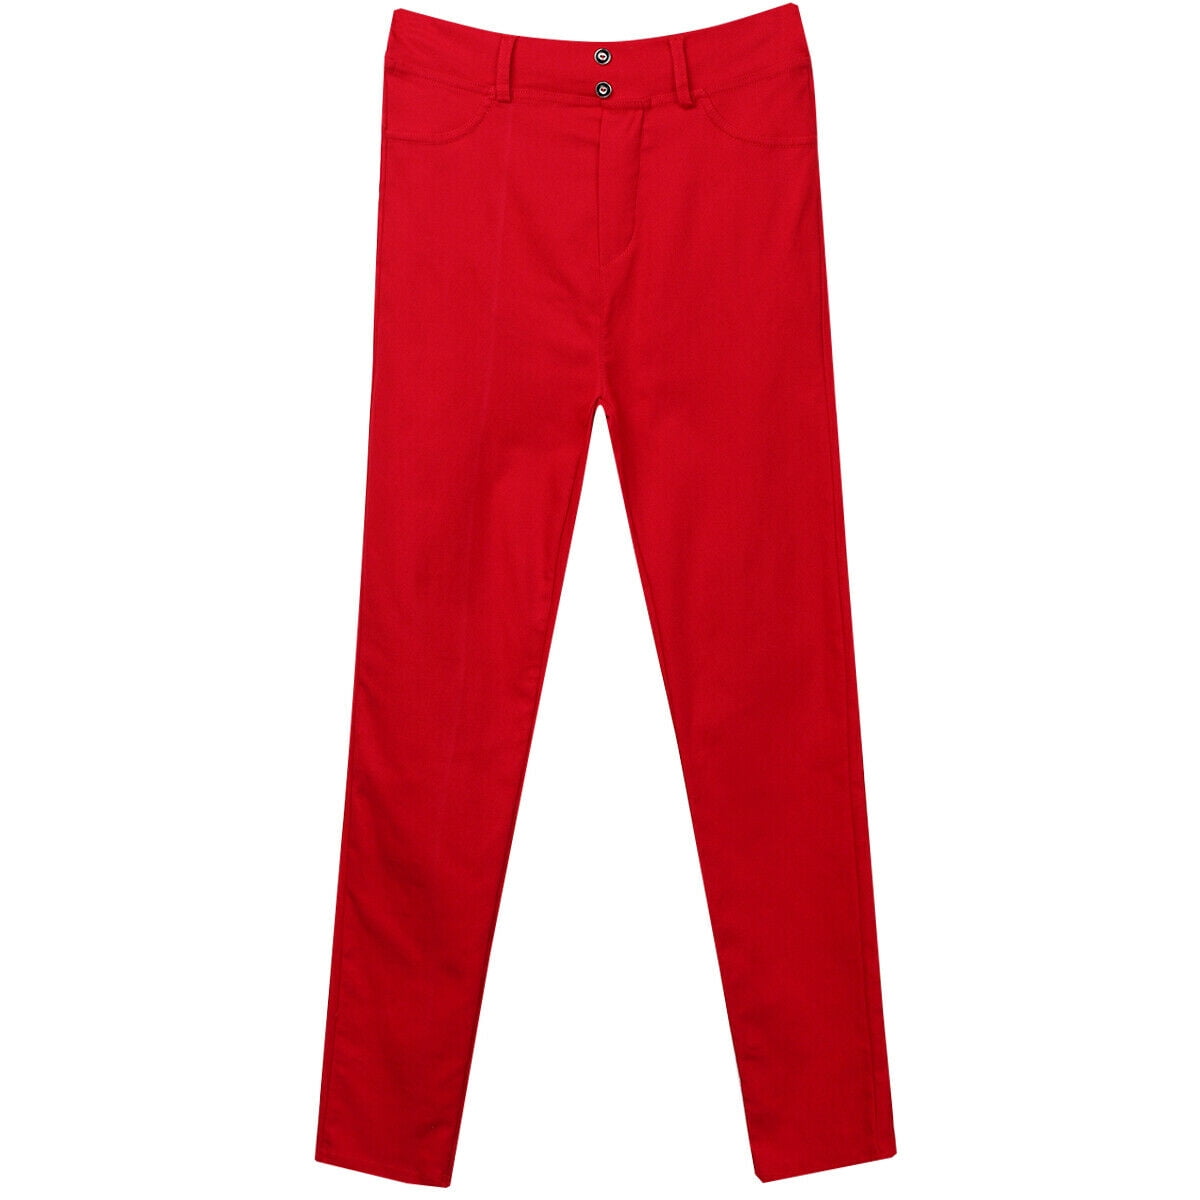 red high waisted jeggings